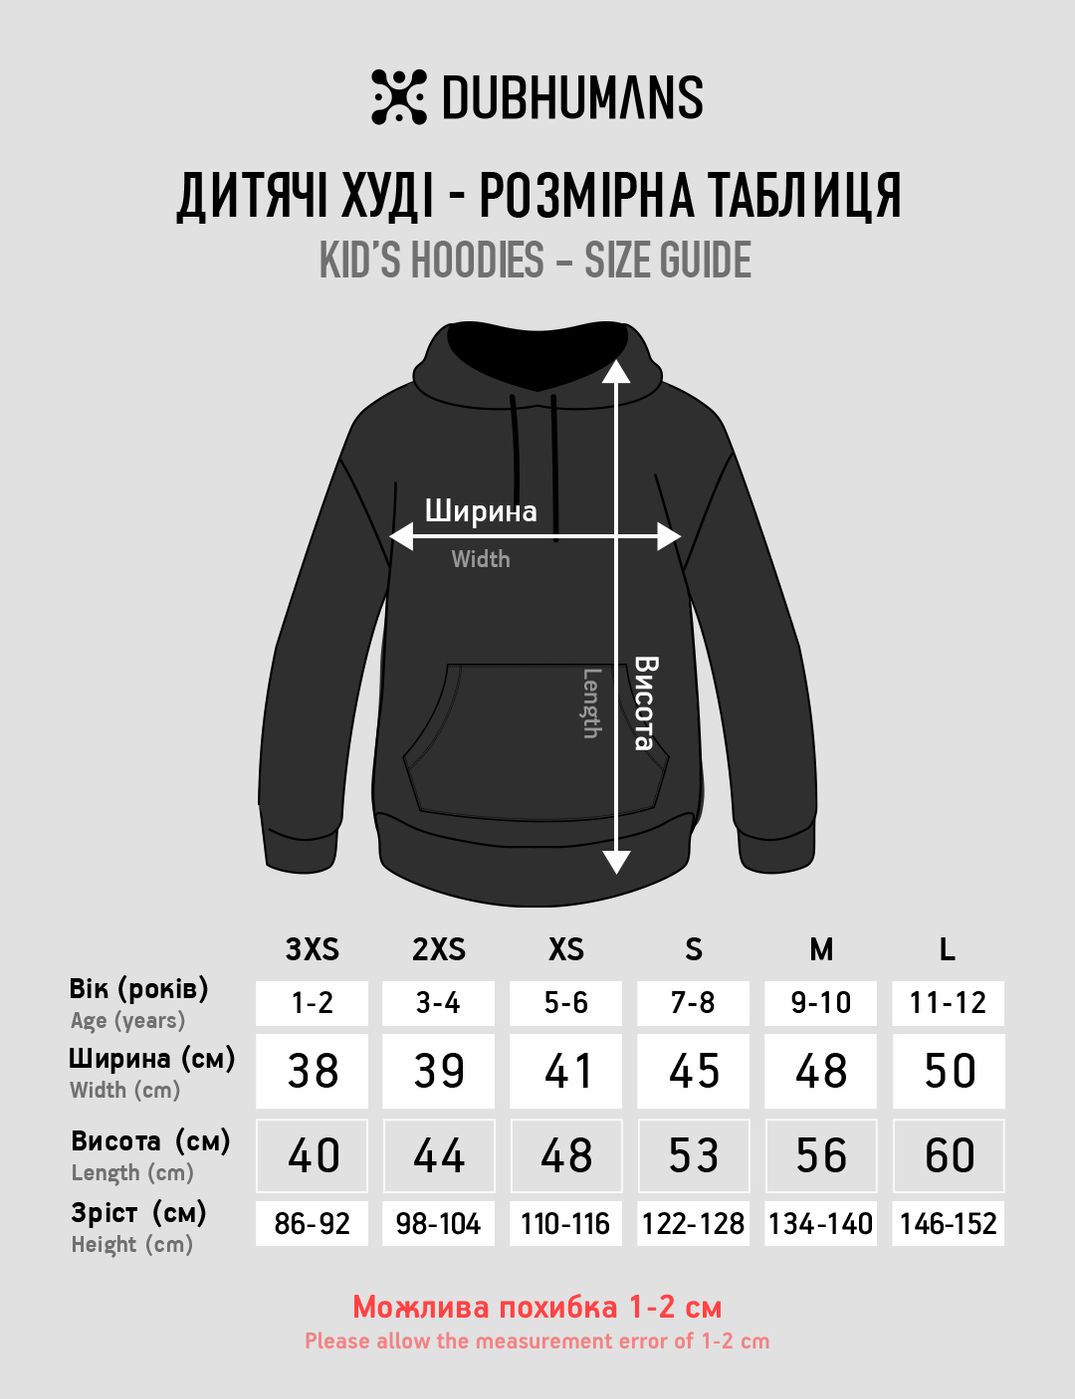 Kid's hoodie "Cat on Synthesizer", Black, XS (110-116 cm)